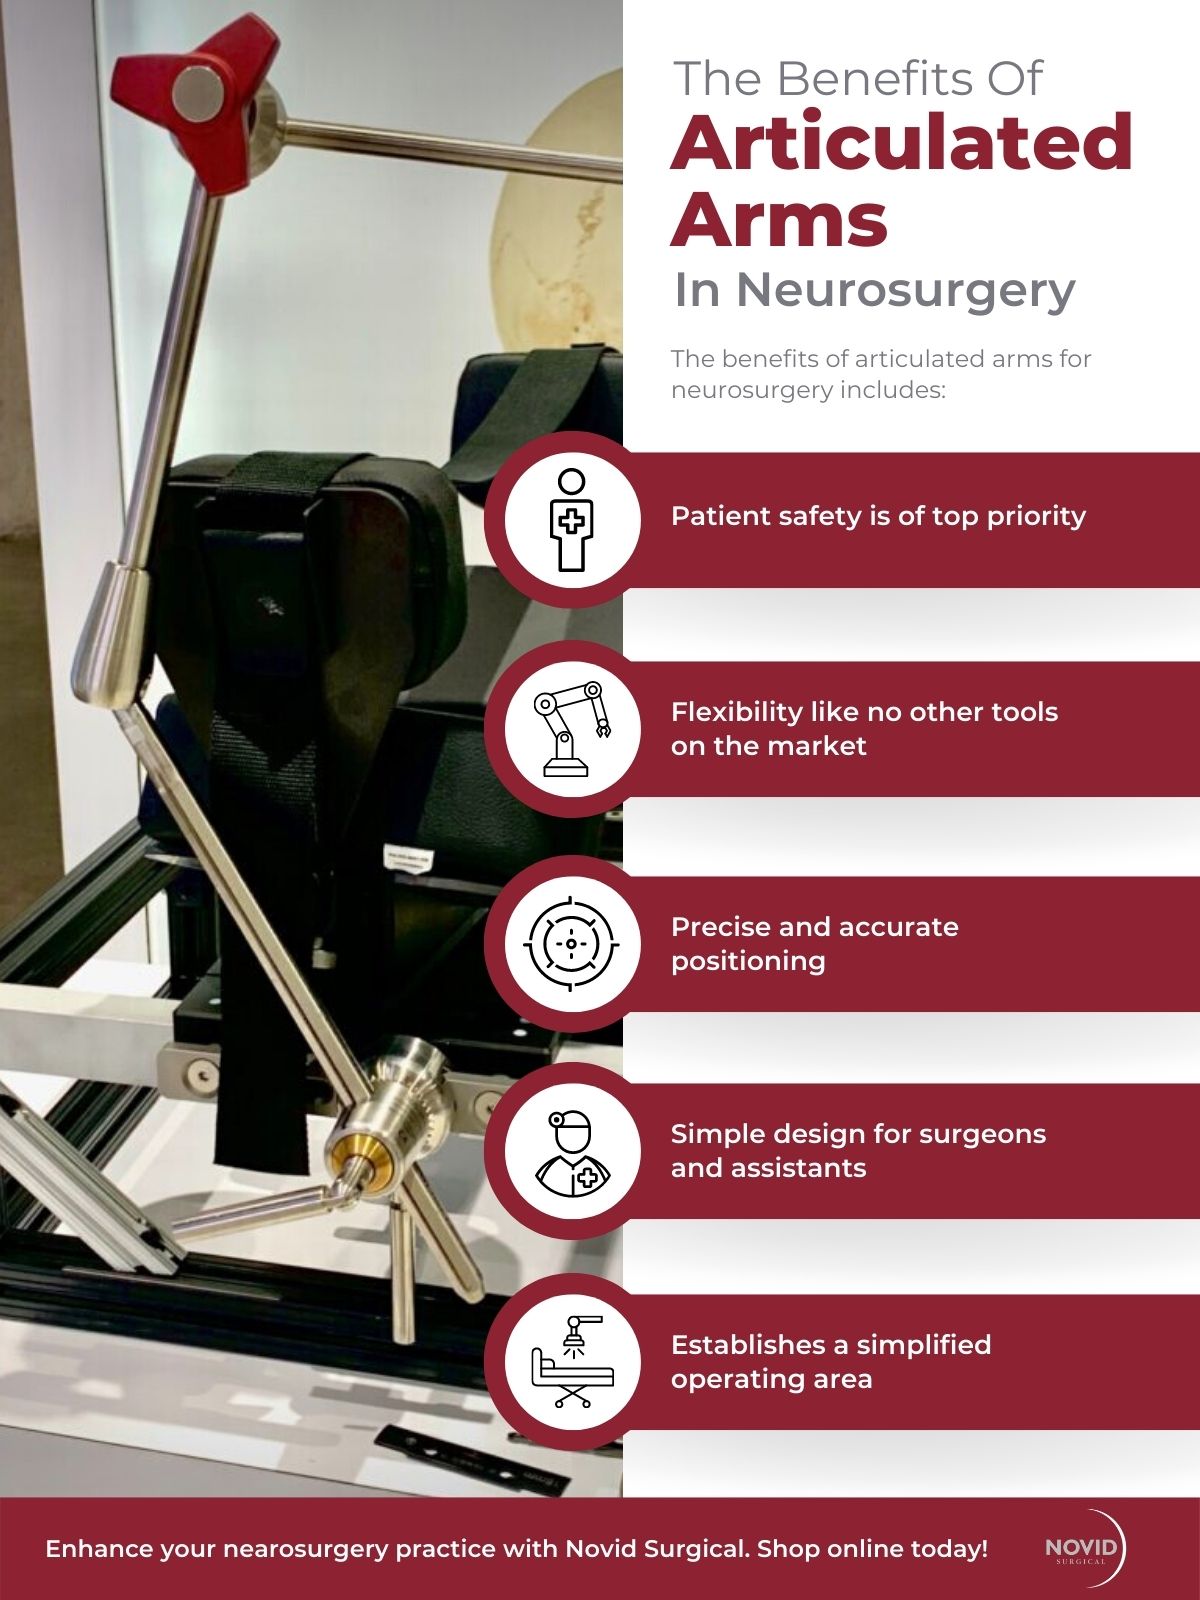 Infographic - The Benefits of Articulated Arms in Neurosurgery (1)